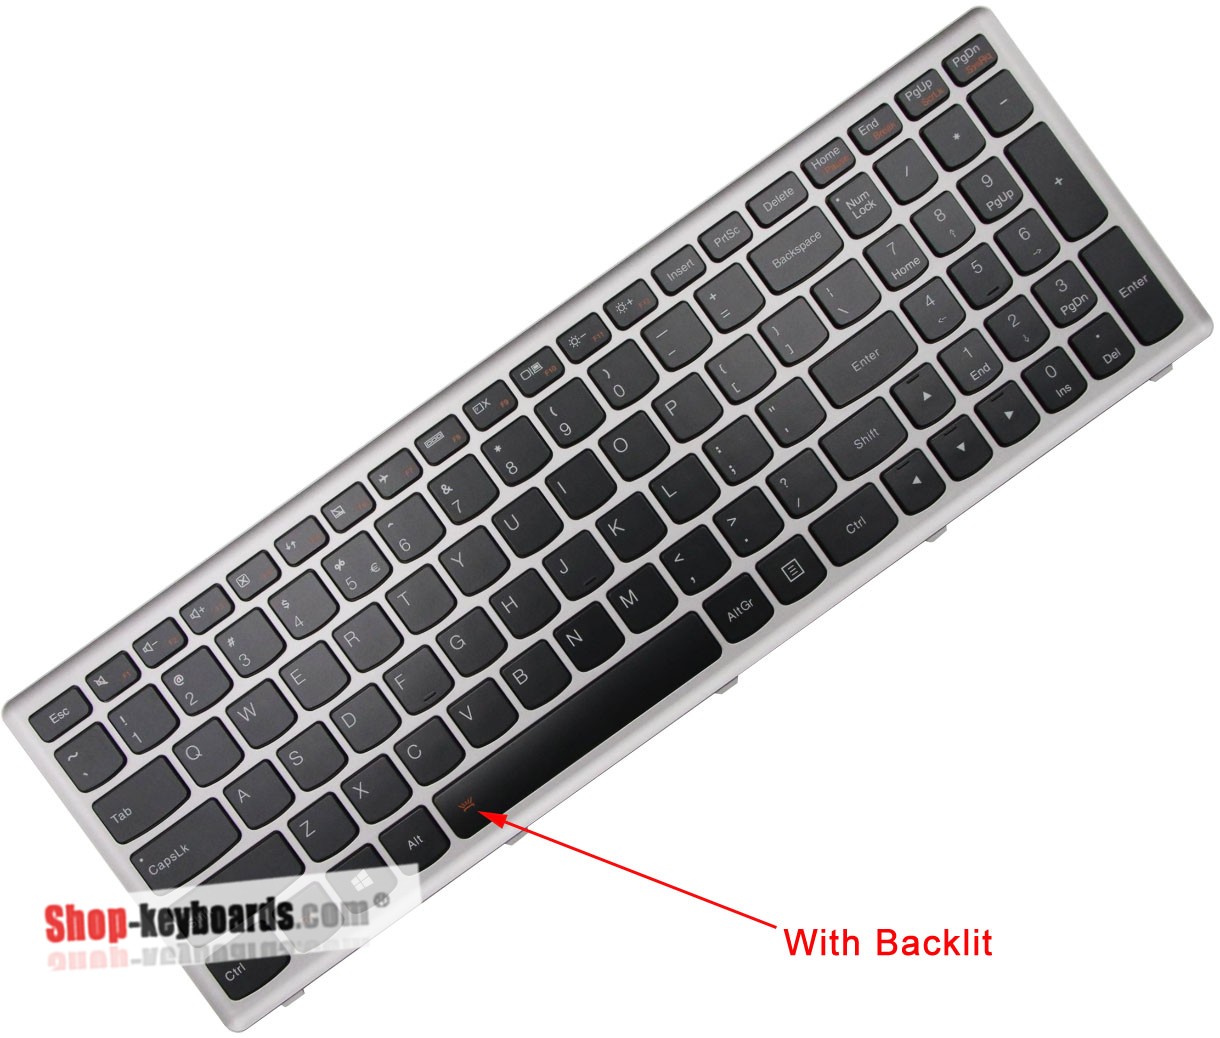 Lenovo Ideapad Z500G Keyboard replacement